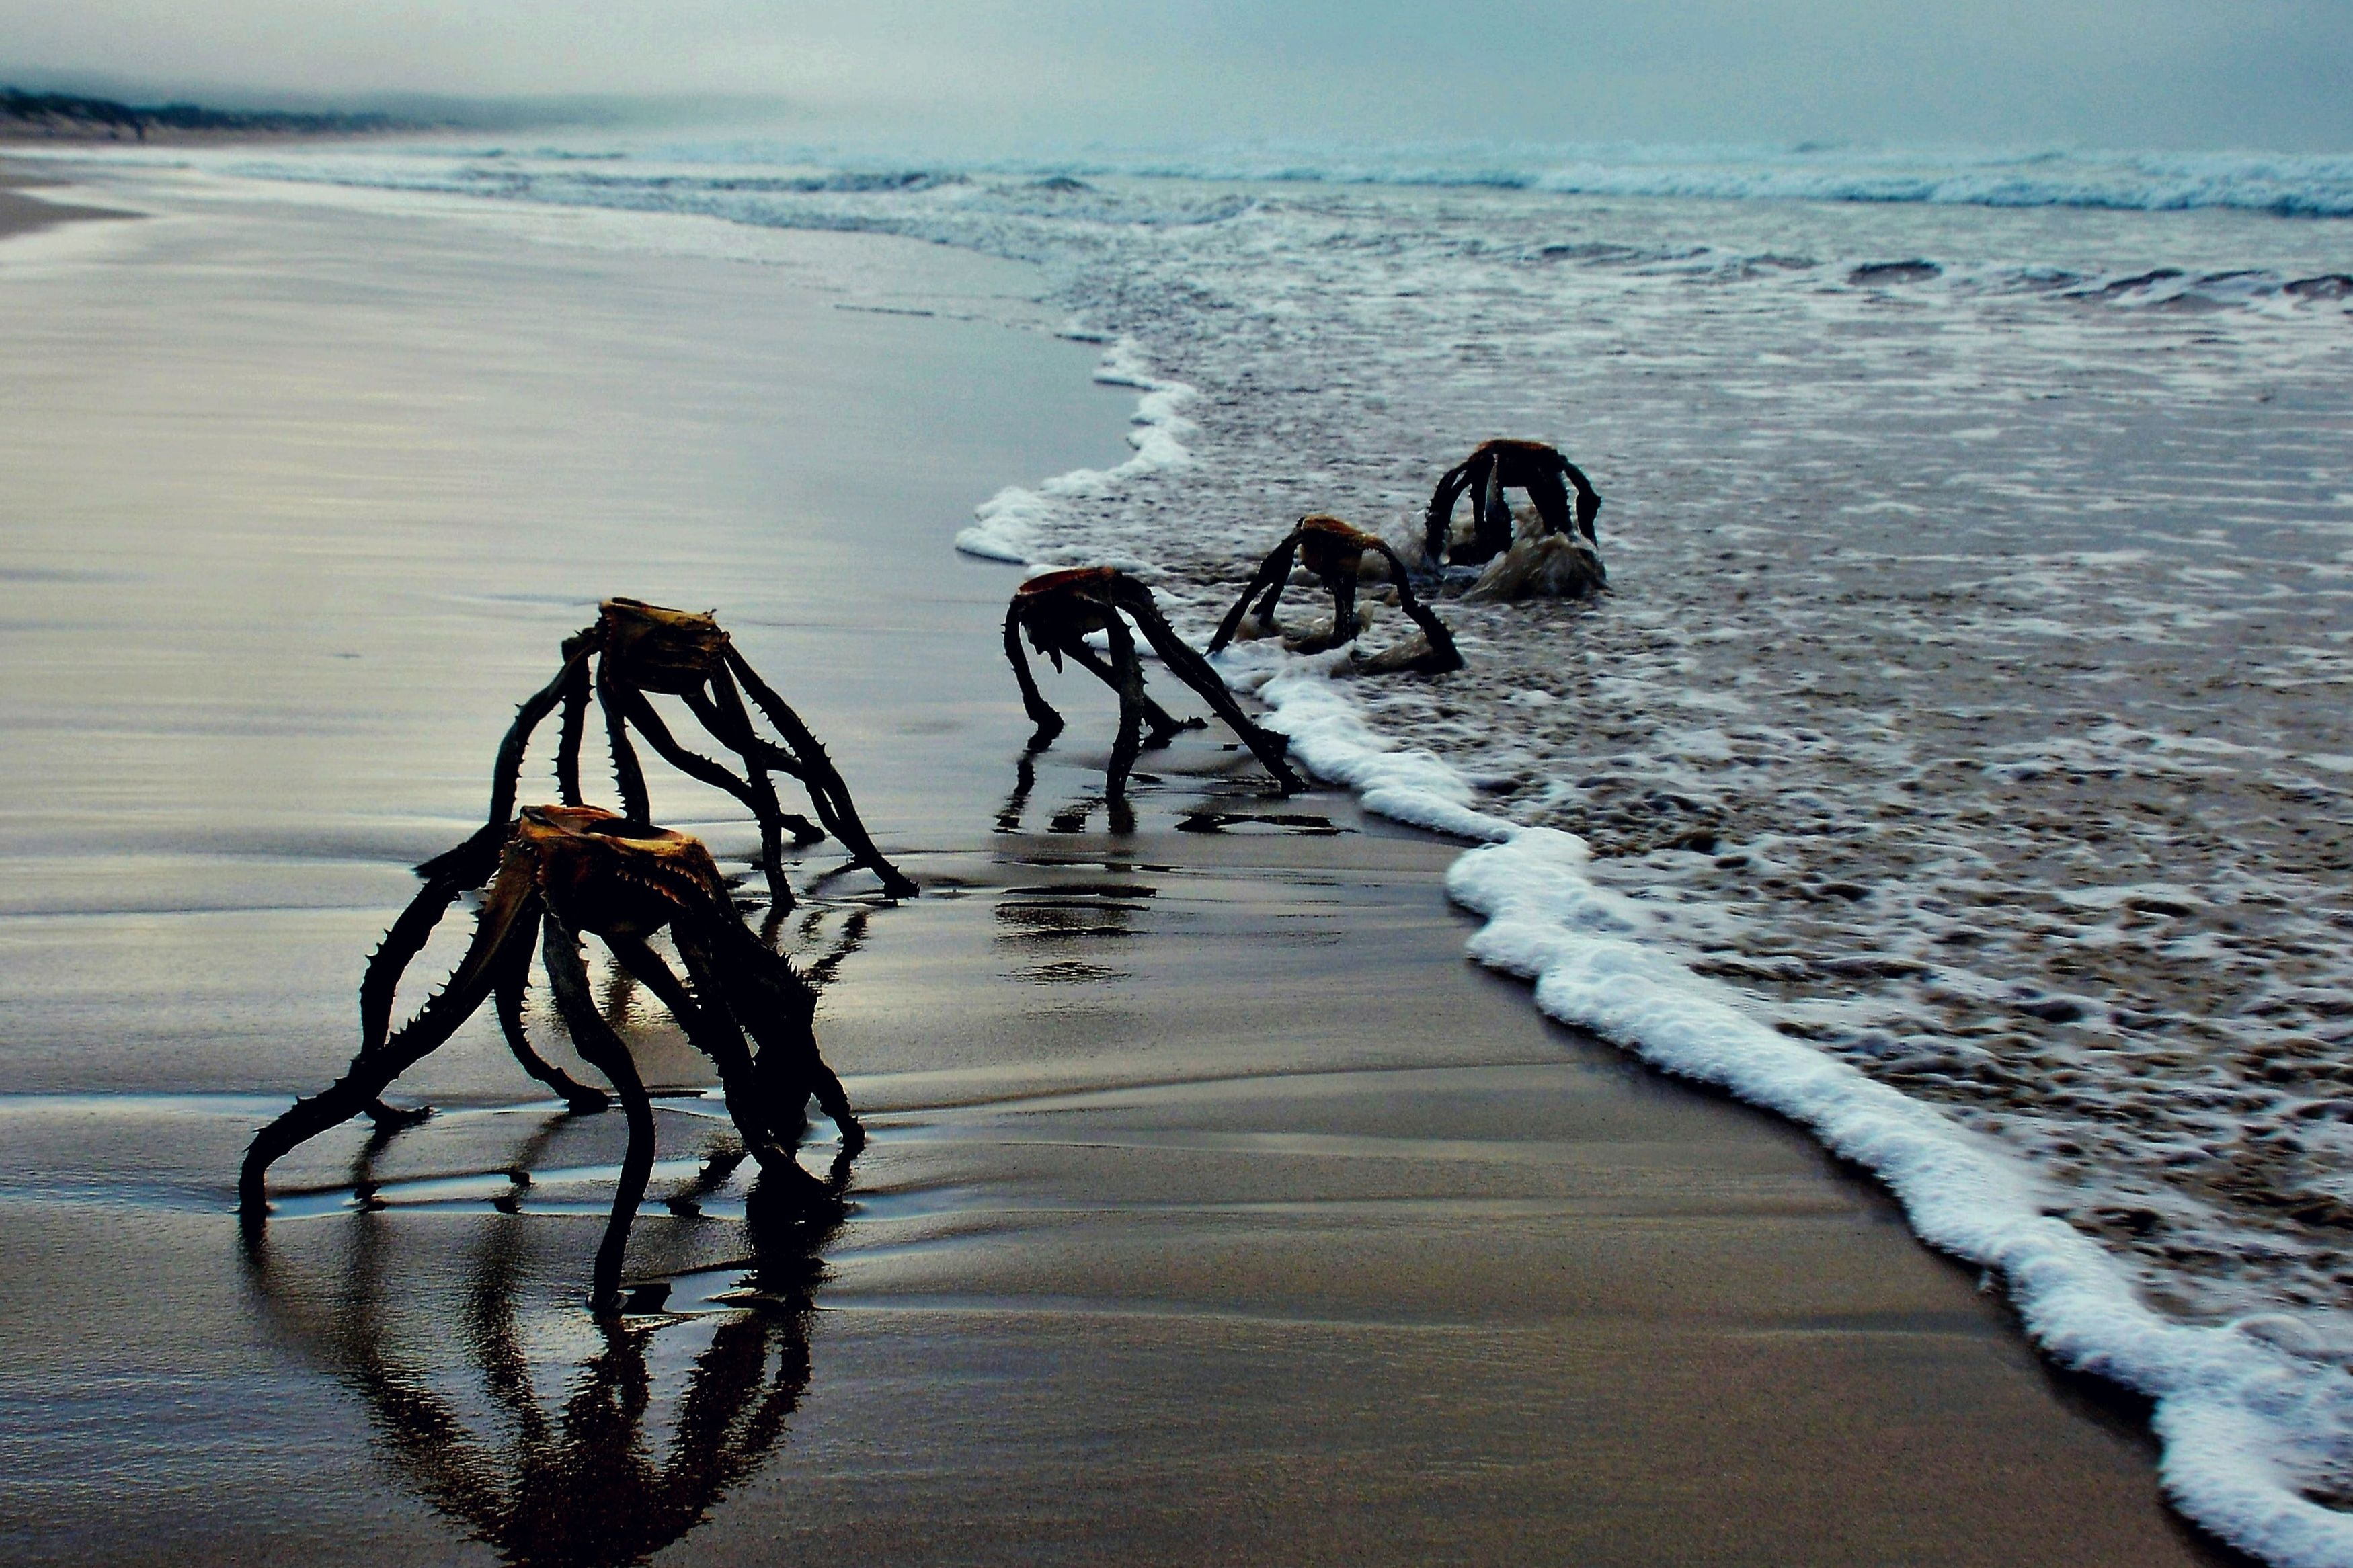 A Man Sparked Panic After Sharing Creepy Photos Of Creatures Coming Out Of The Ocean